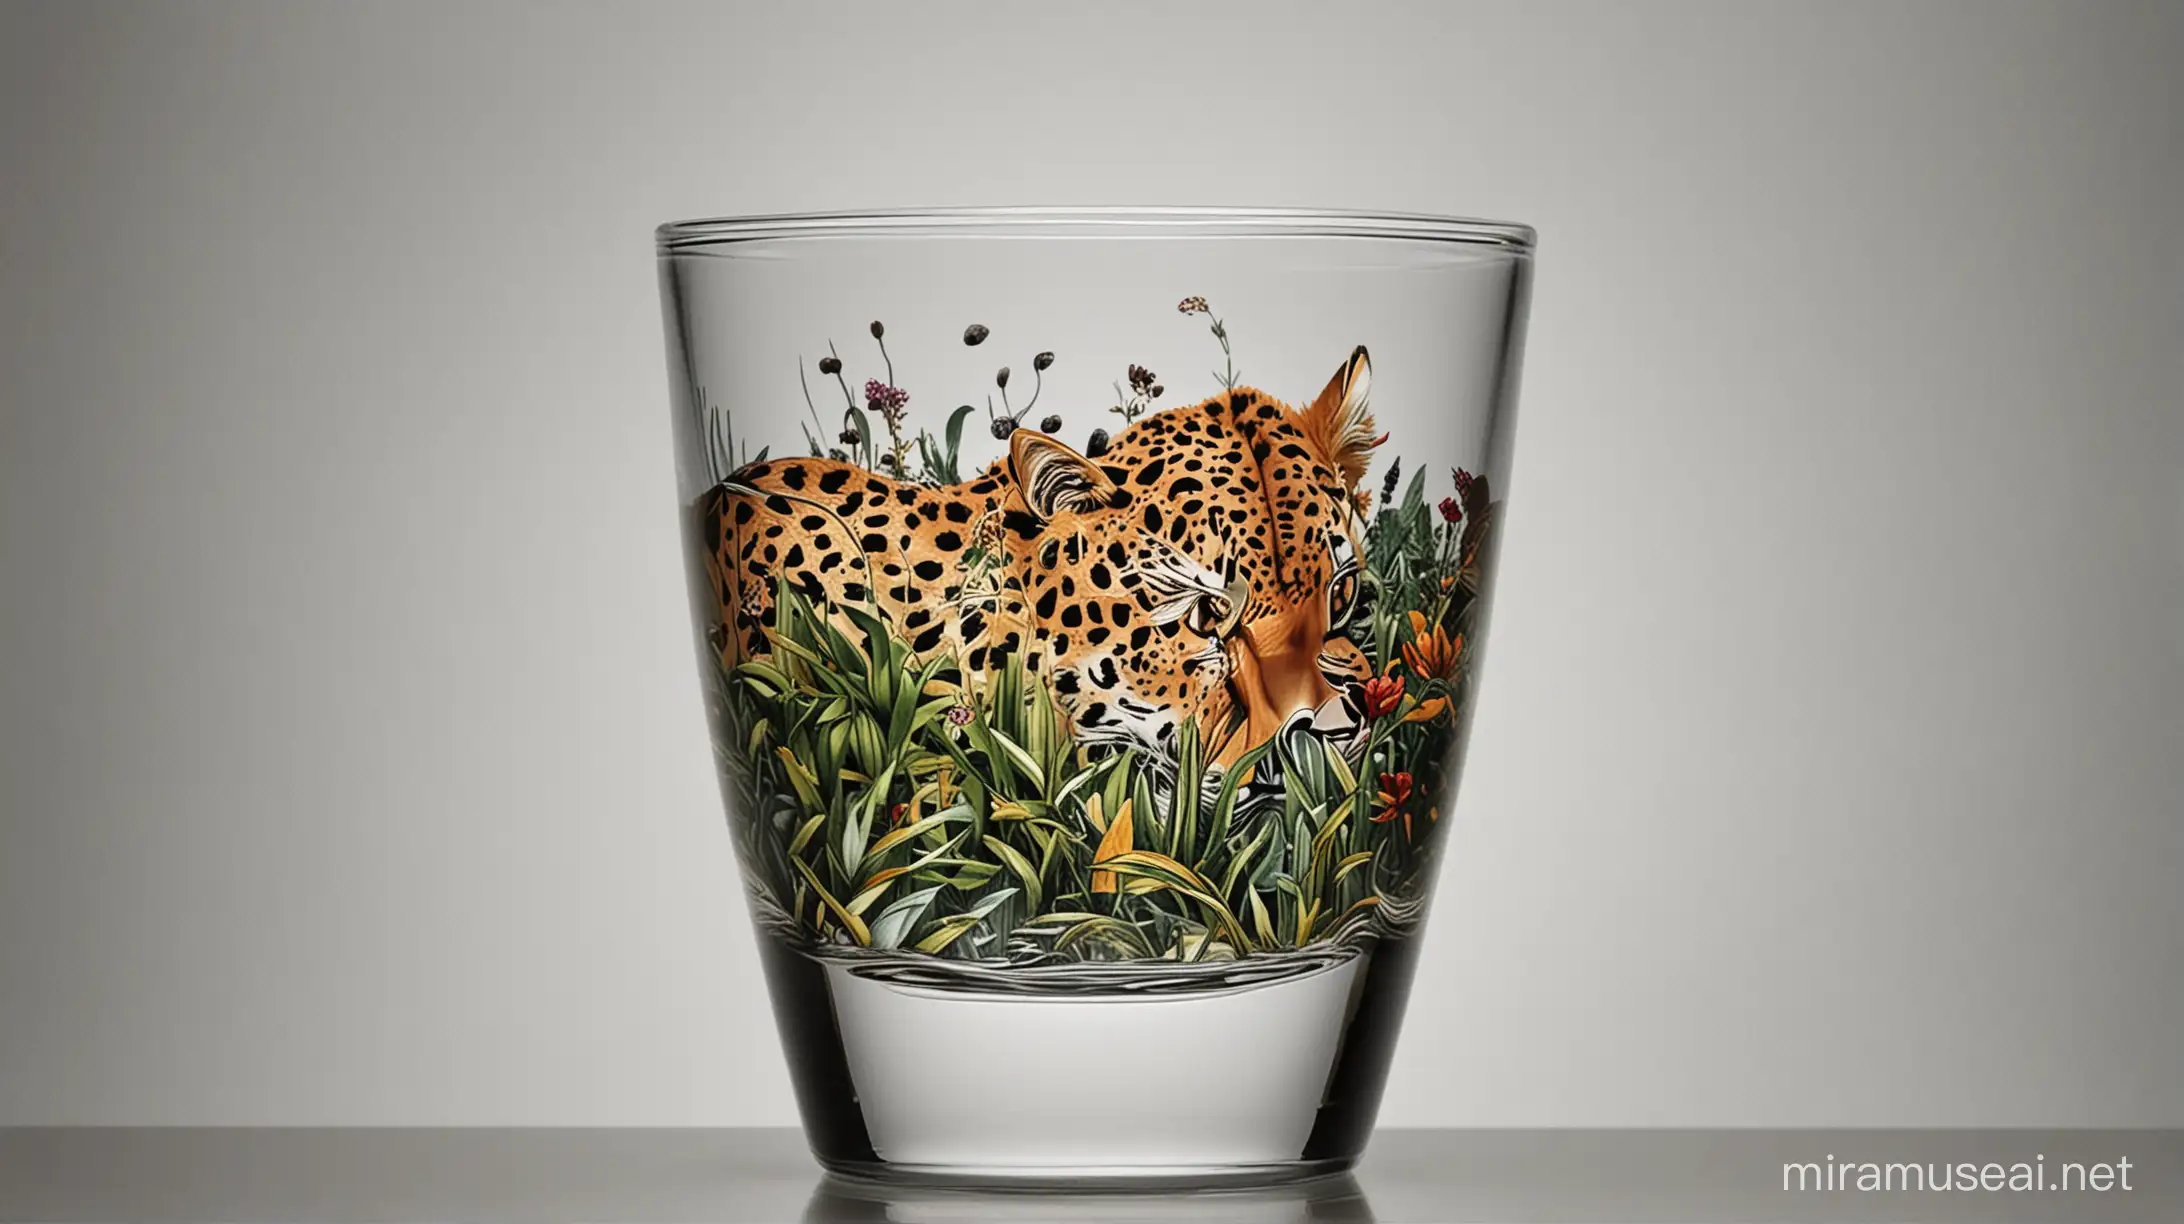 Wild in a glass 

